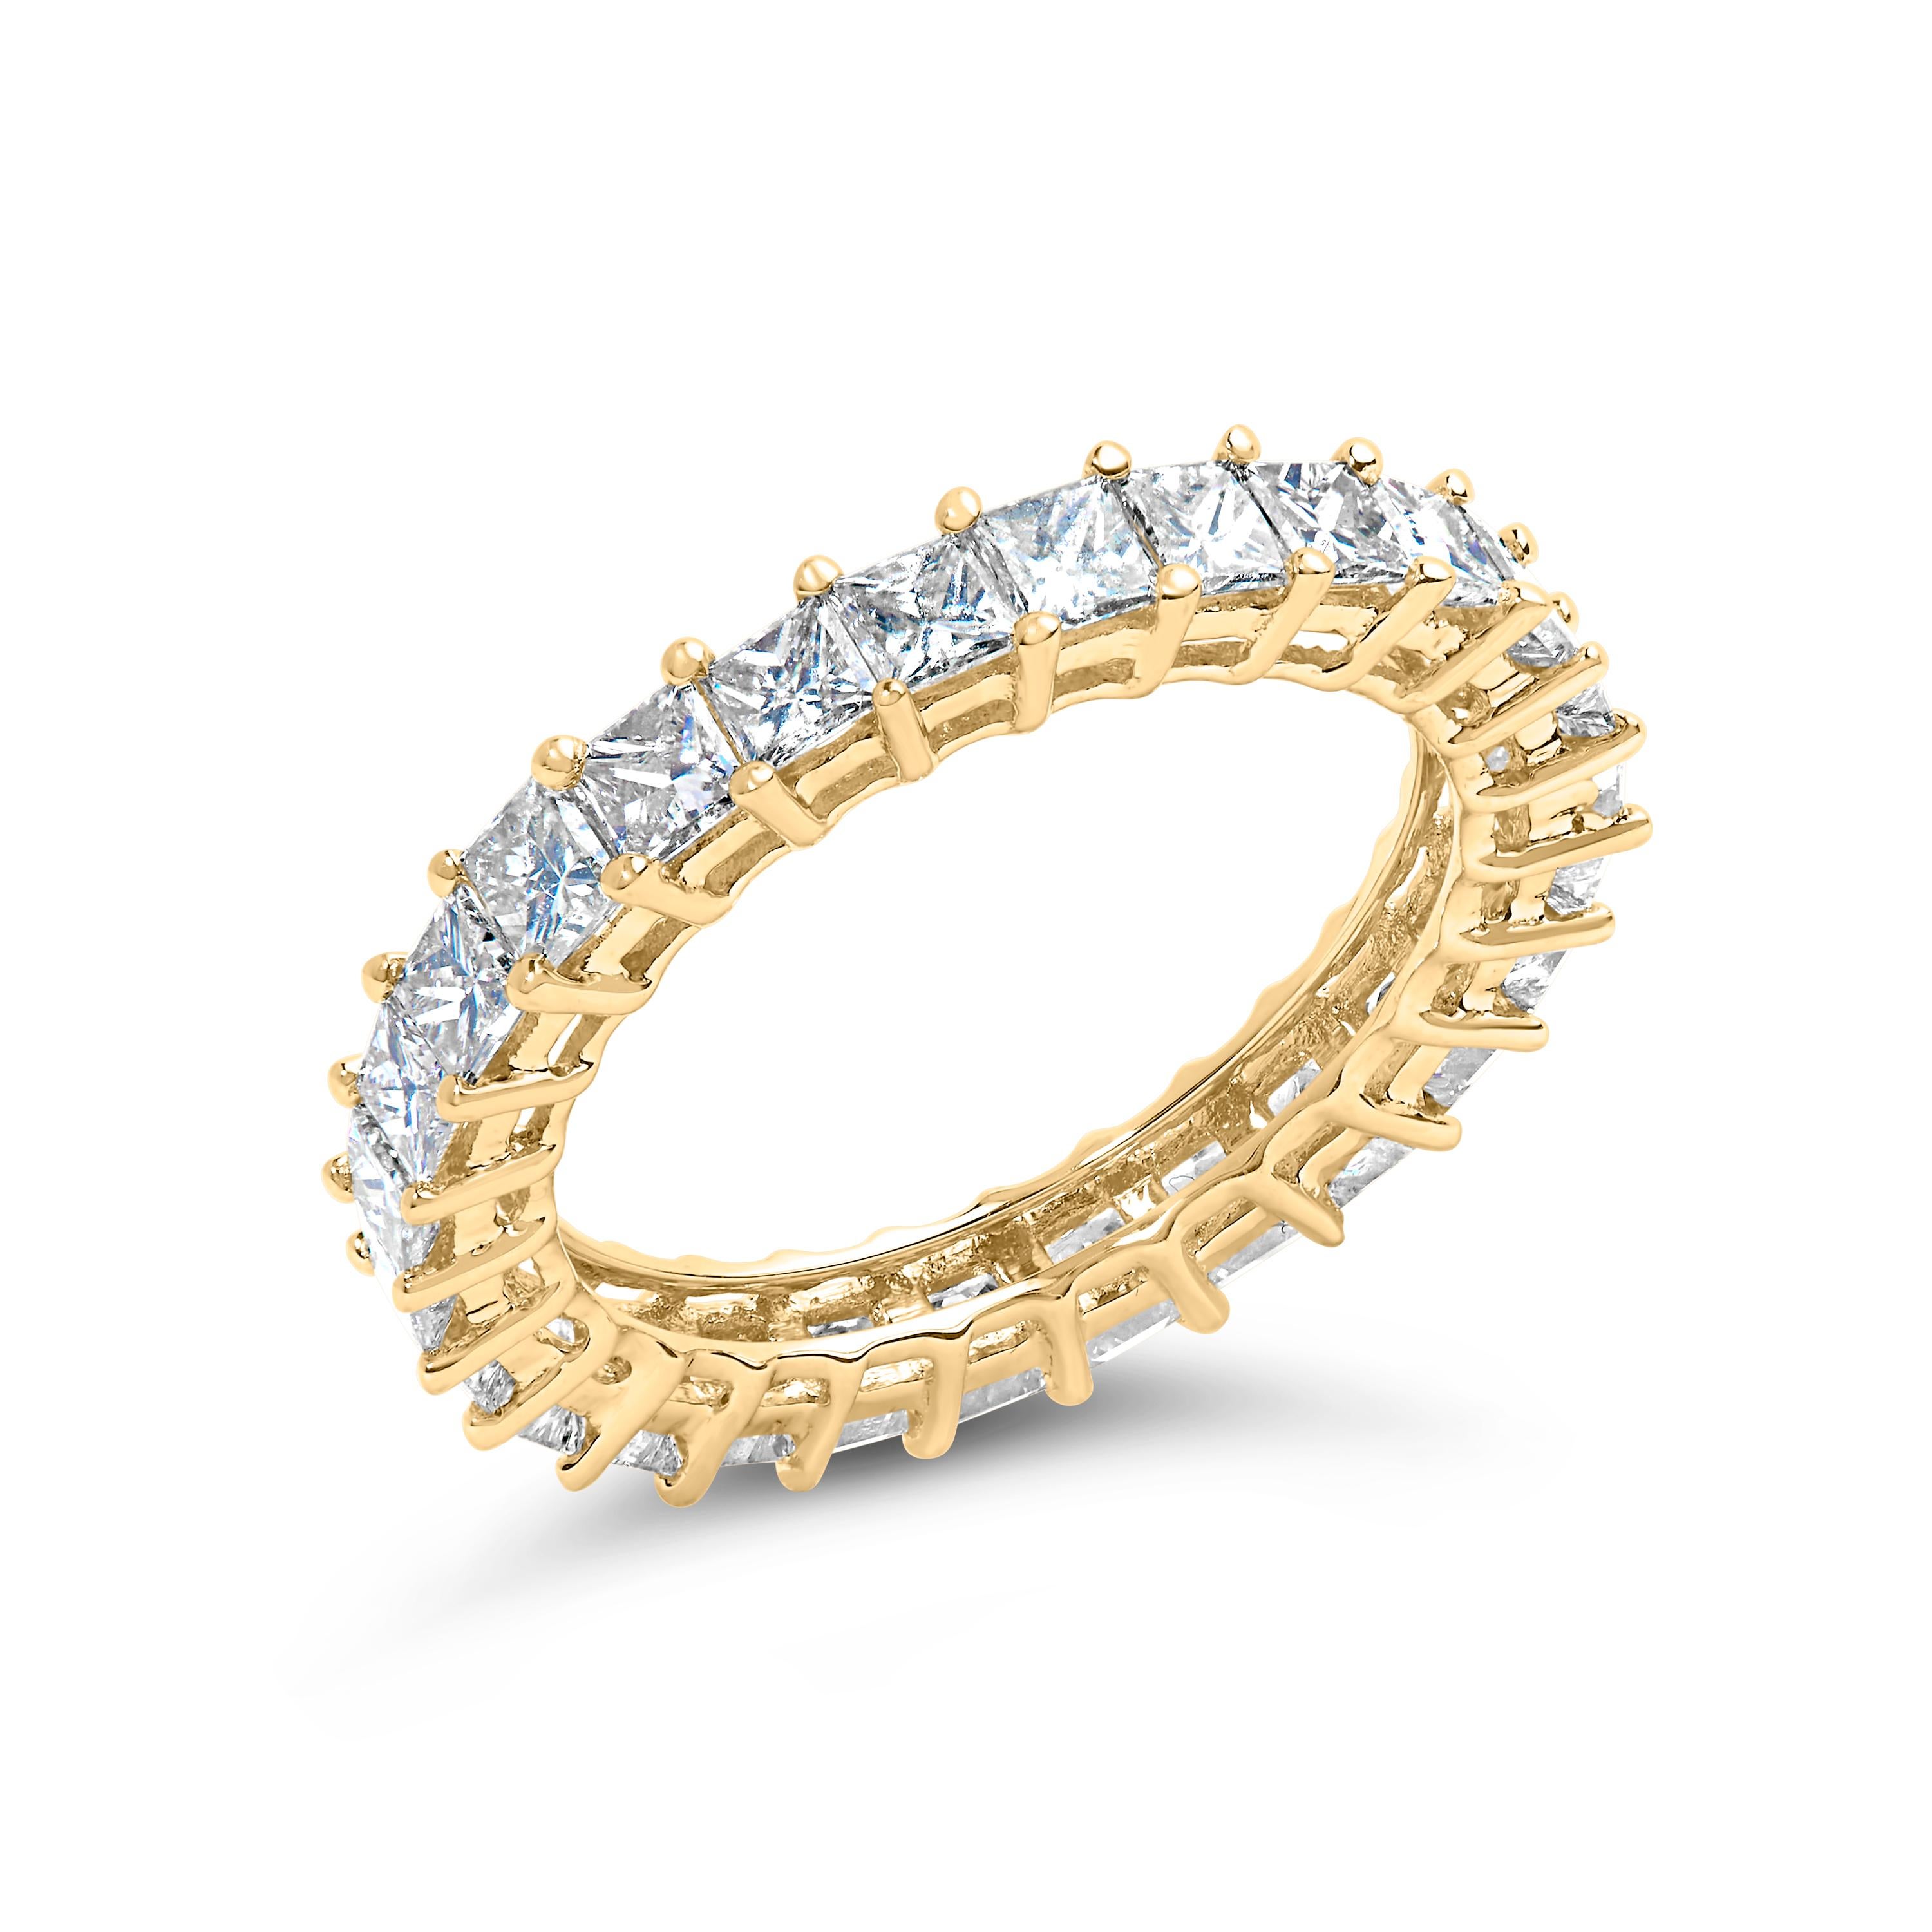 Introducing a mesmerizing symbol of eternal love and exquisite craftsmanship, this 14K Yellow Gold Princess-cut Diamond Eternity Band Ring is a true masterpiece. With a dazzling total weight of 3.0 carats, this ring boasts 27 natural diamonds, each